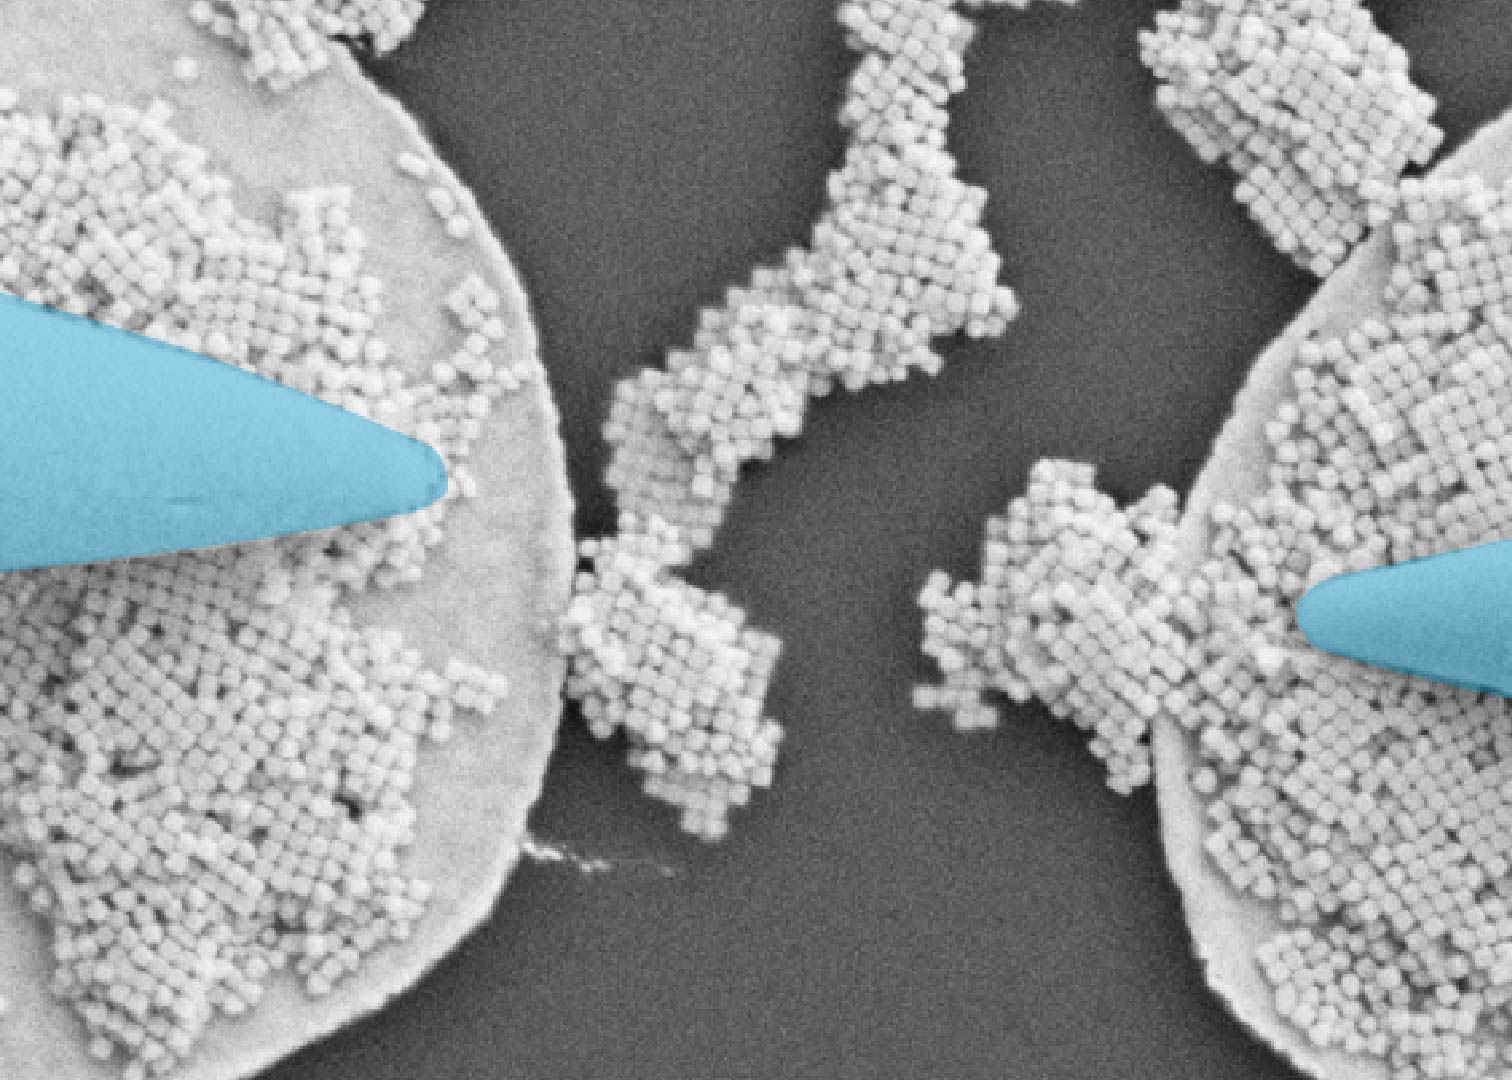 SEM image of two nanoprobes in contact with mesocrystal formation to characterize its electrical properties.